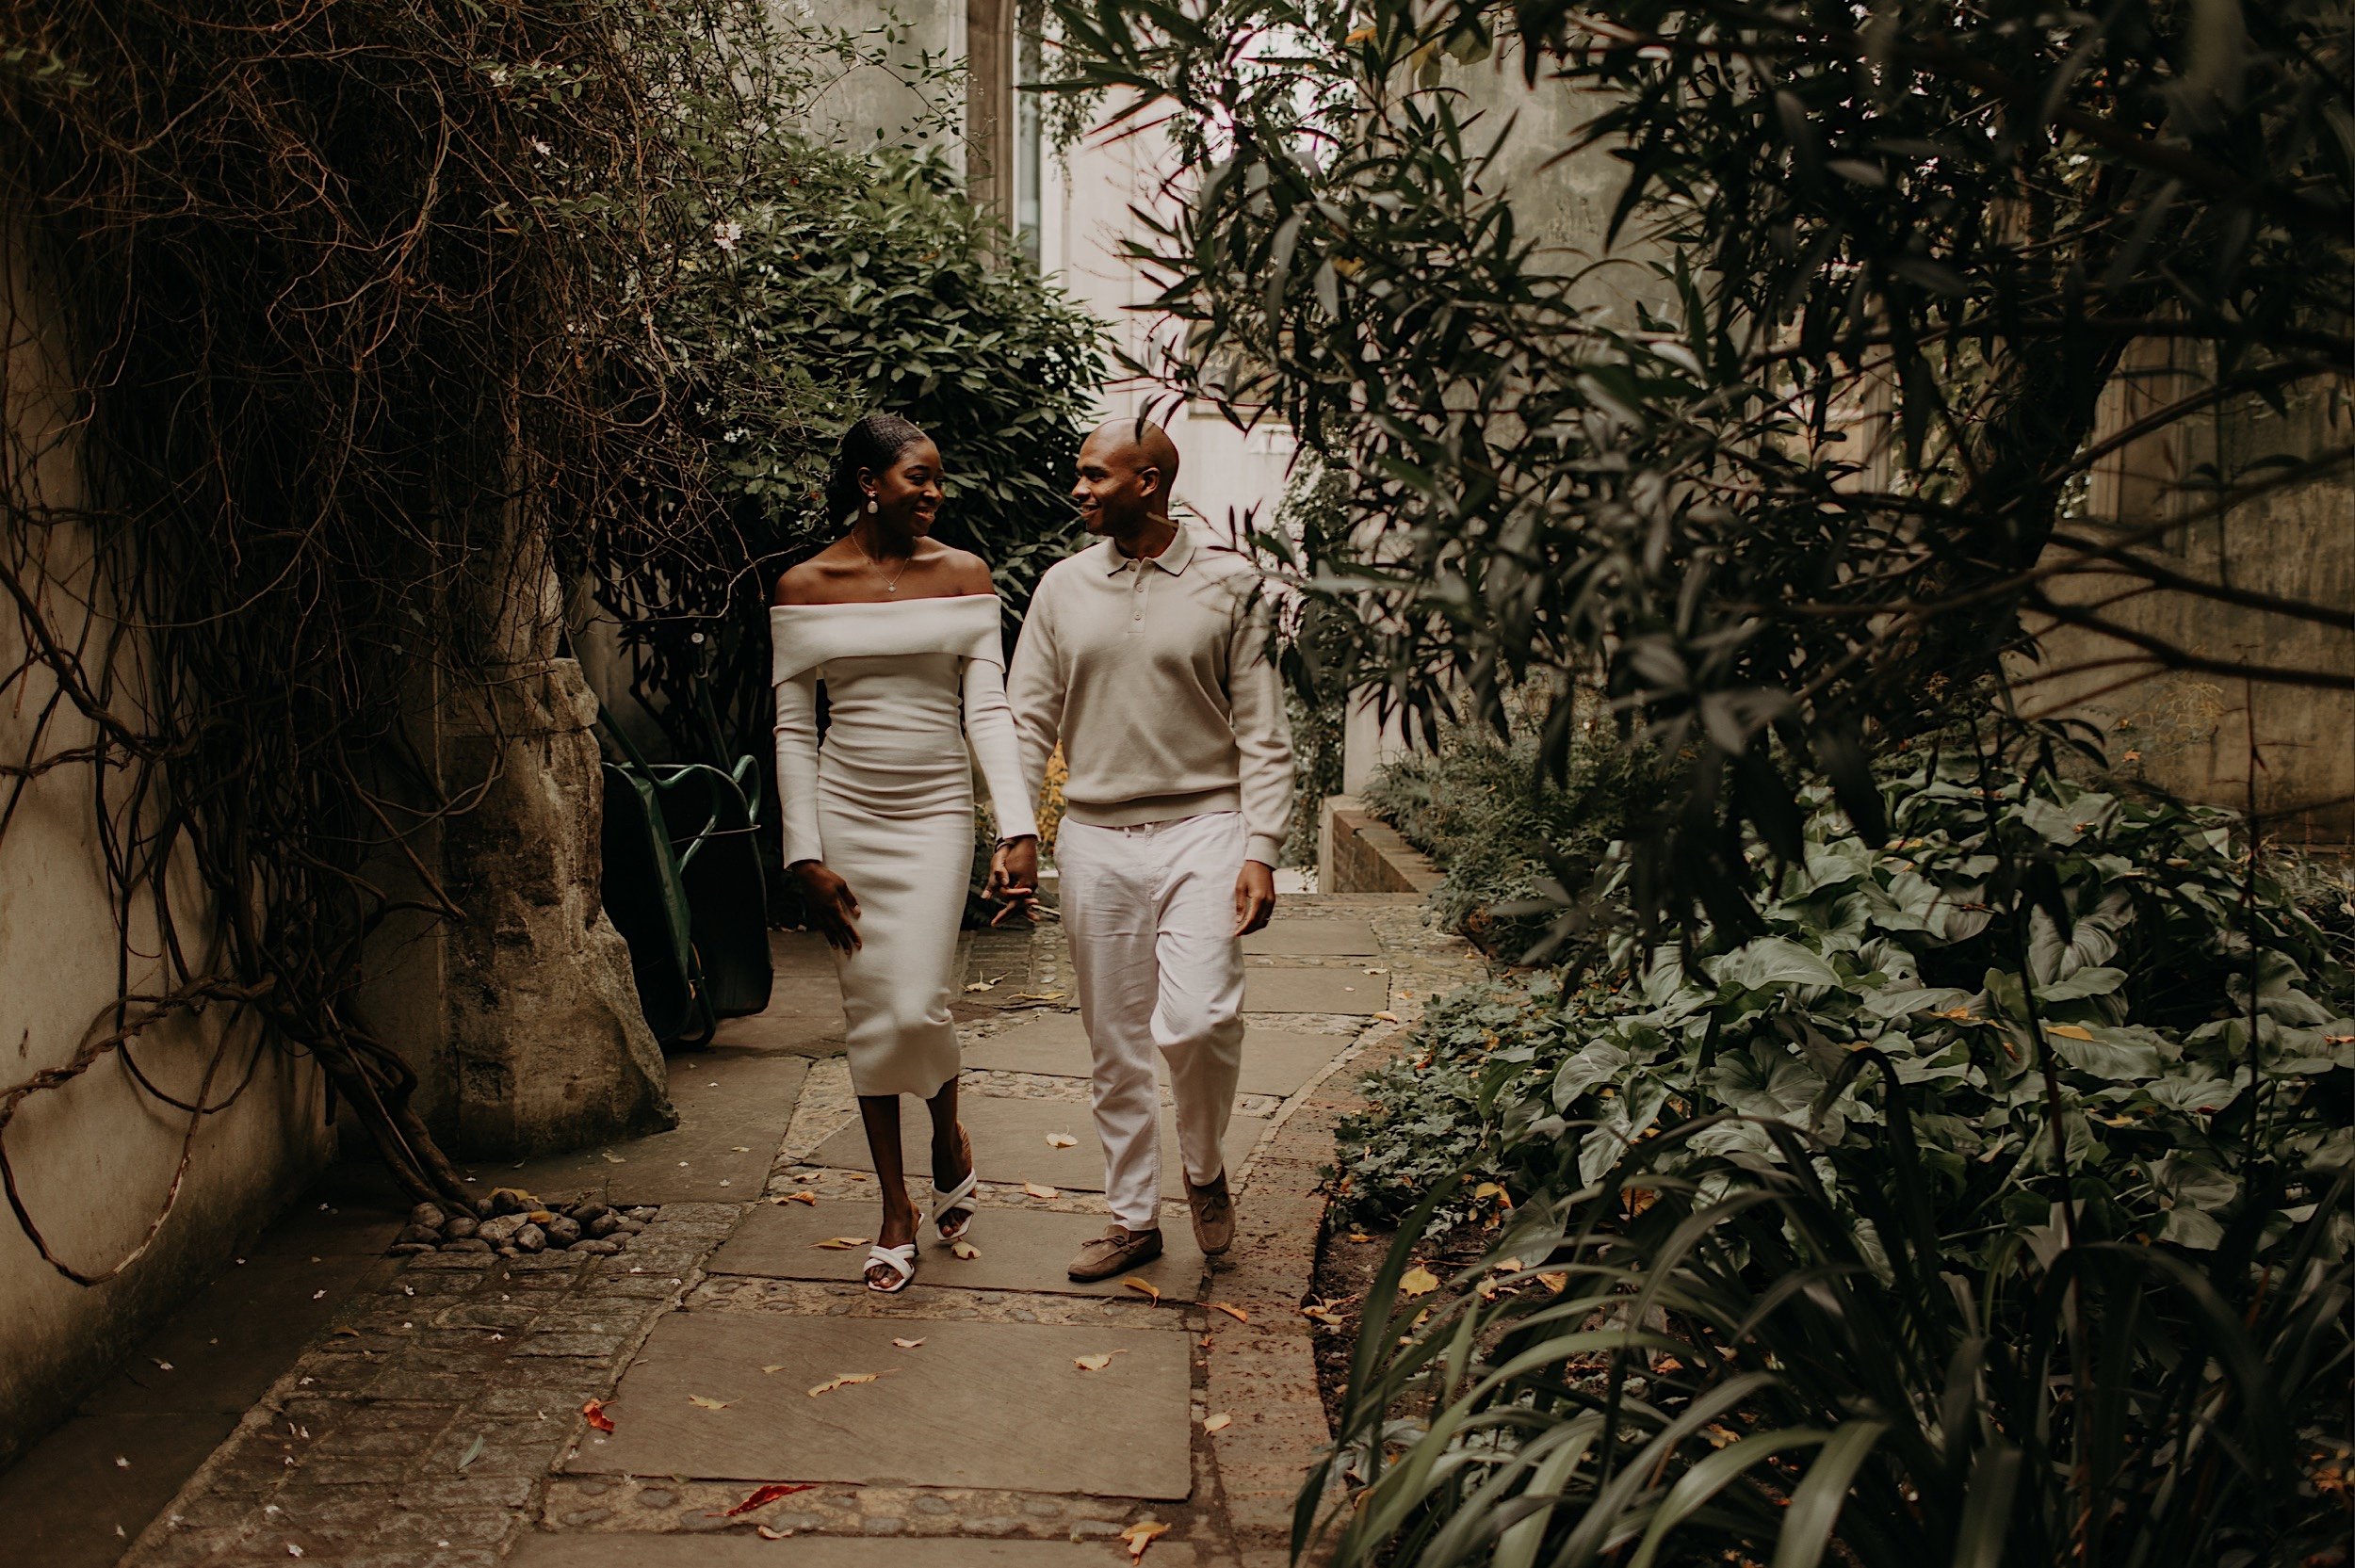 03_St-Dunstans-in-the-east-pre-wedding-shoot0006_Gorgeous black model couple in love walk through st dunstan in the east.jpg